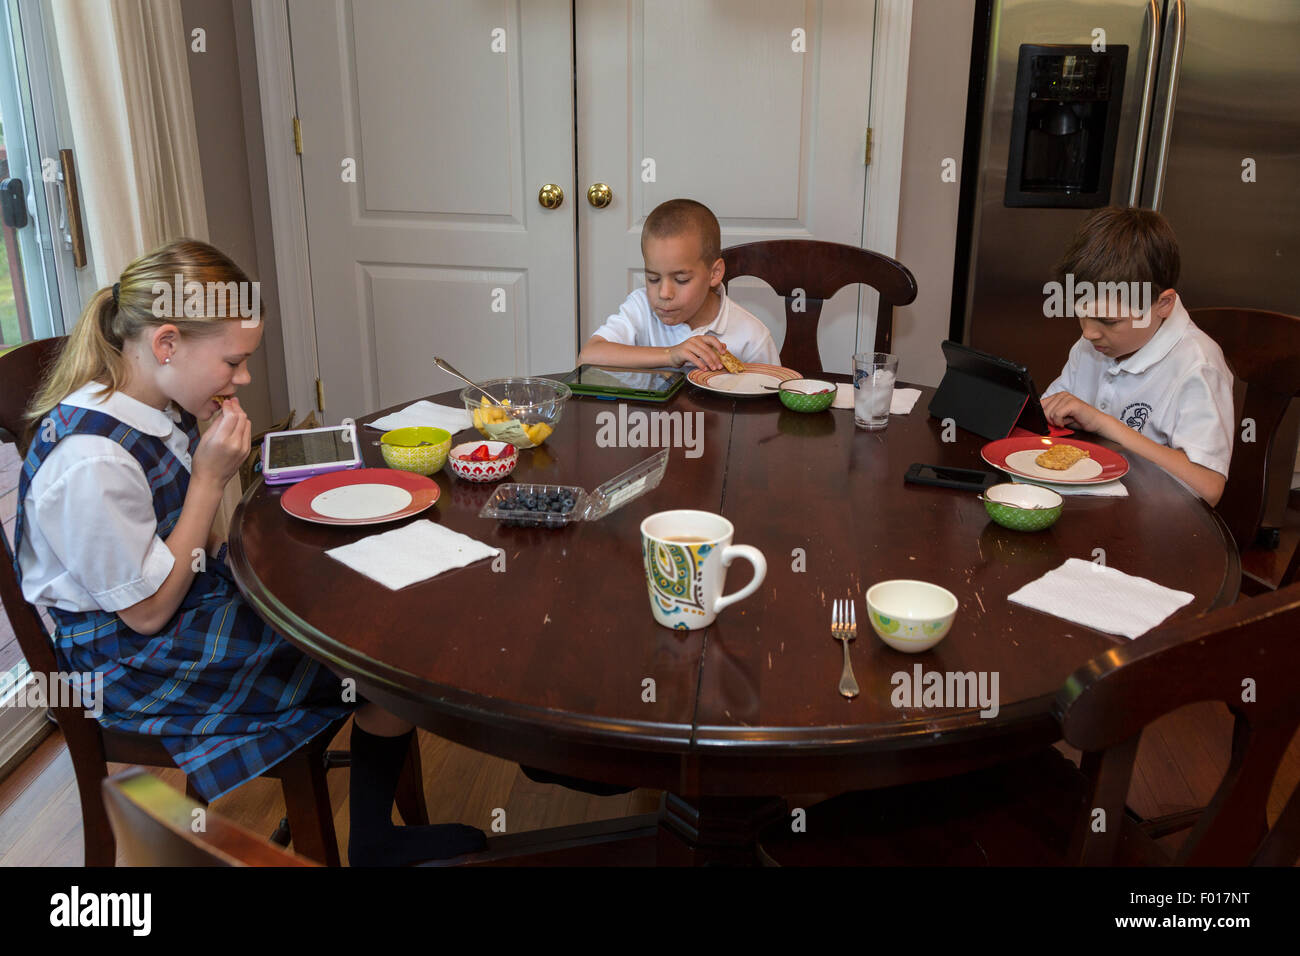 Modern Elementary School Students at Breakfast, Playing Games on their iPads.  MR Stock Photo